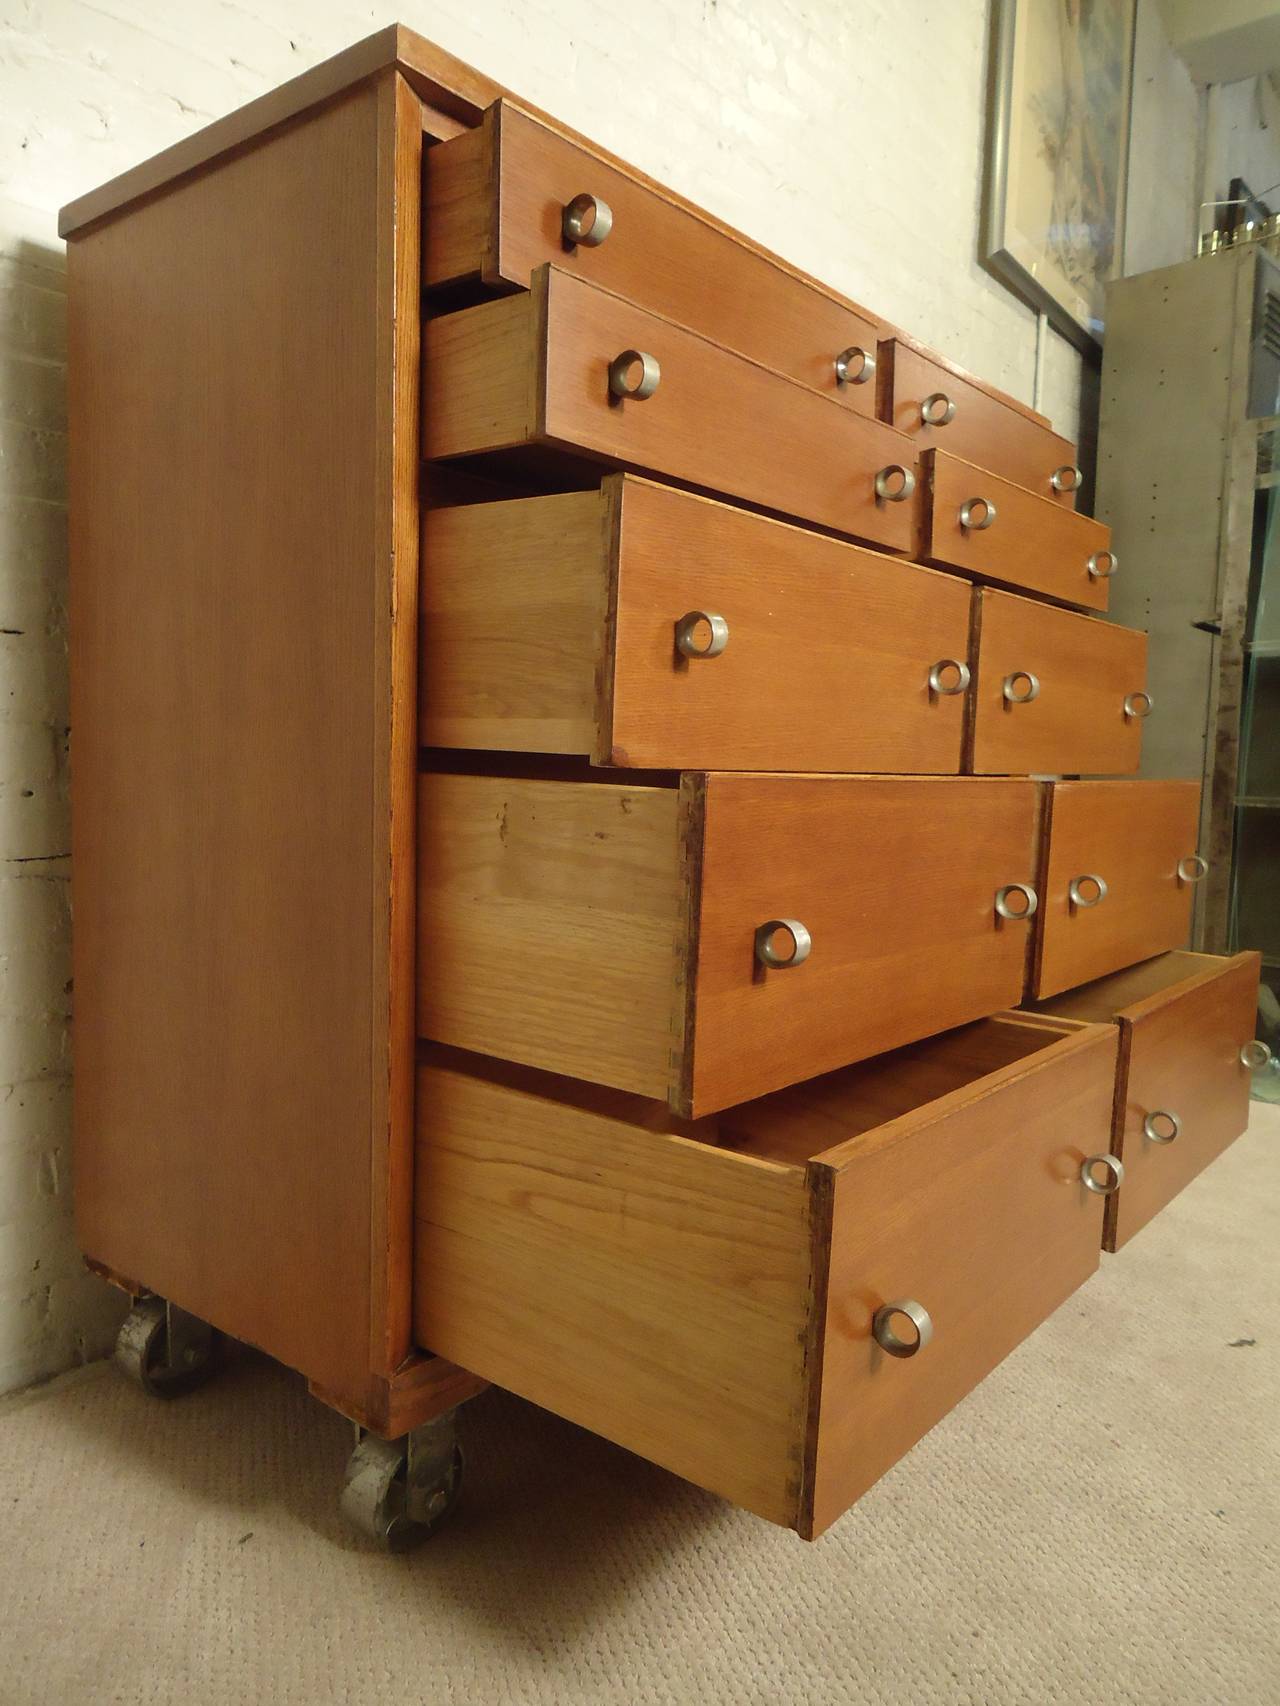 Rare tall chest of drawers with metal ring hardware and complimenting metal casters. Ten total drawers, golden mahogany coloring, ample storage.

(Please confirm item location - NY or NJ - with dealer)